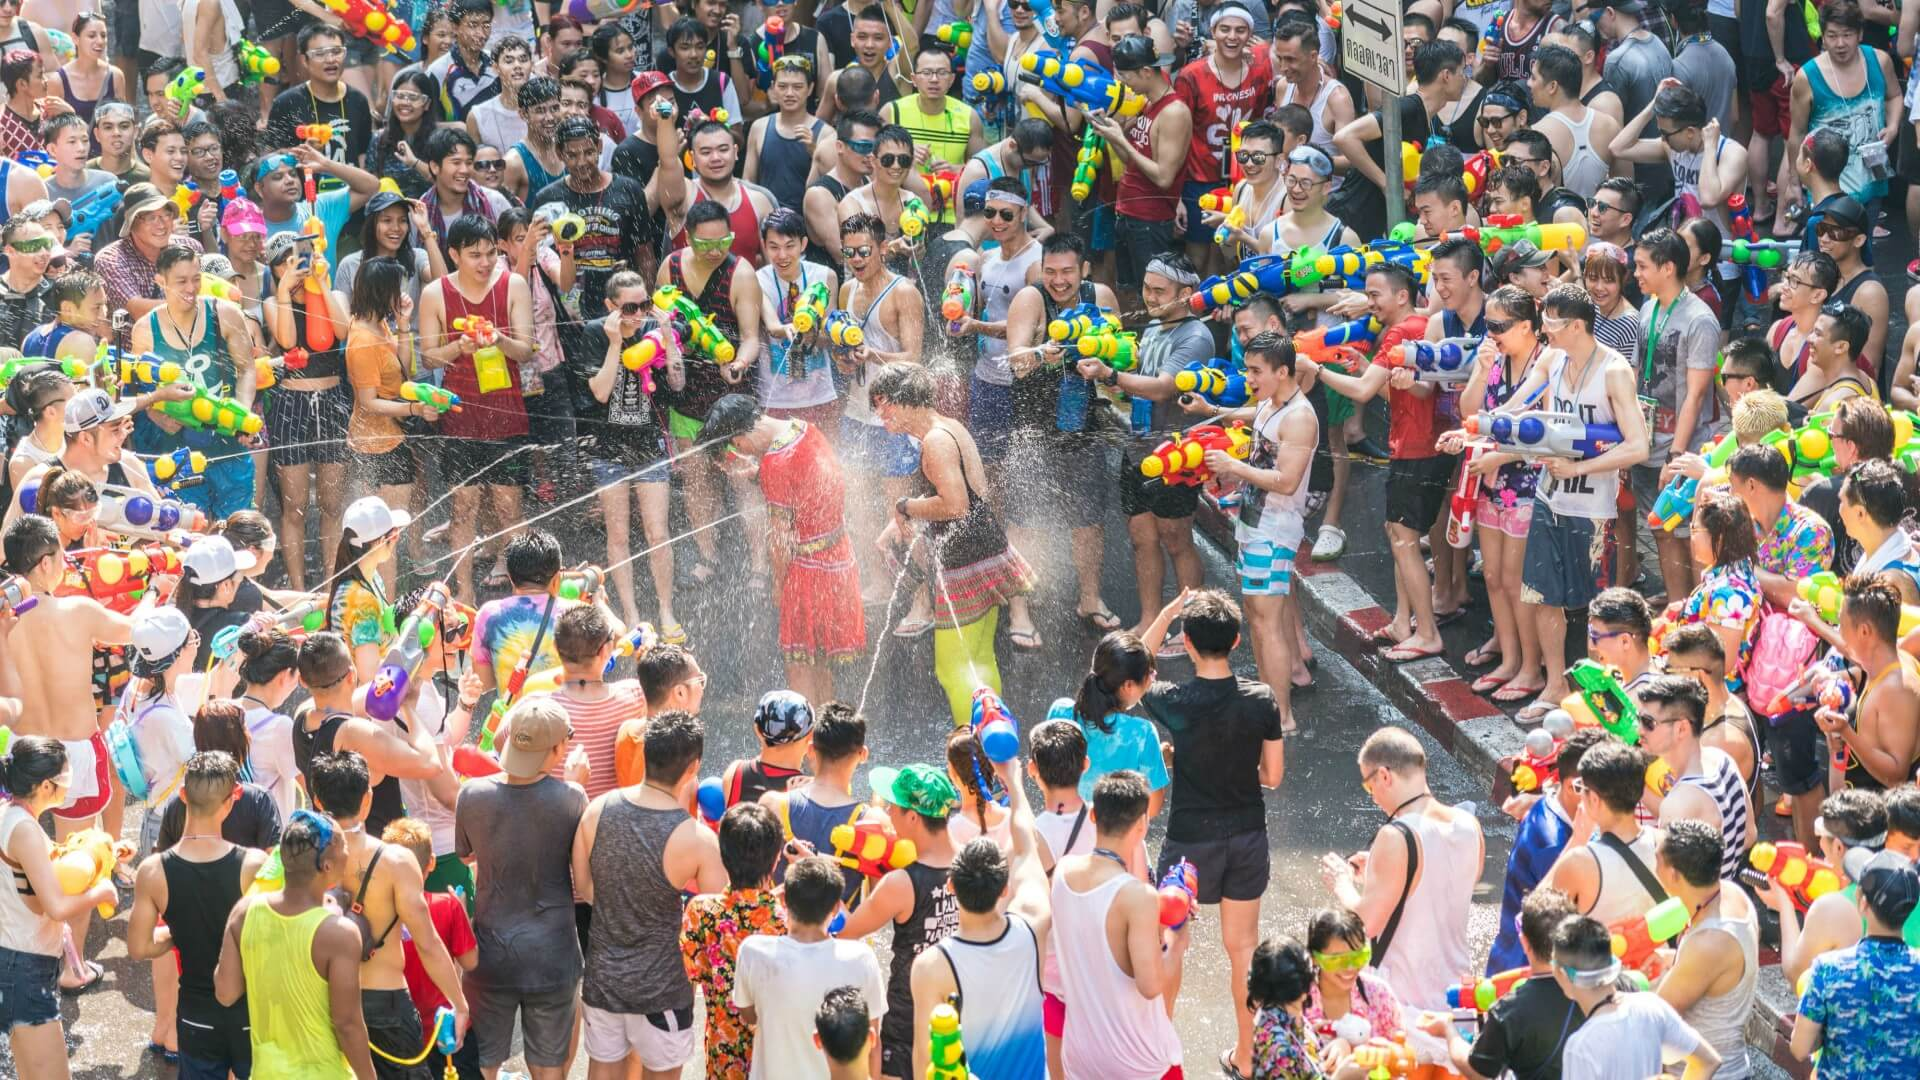 worlds largest water fight festival in thailand tamed due to coronavirus